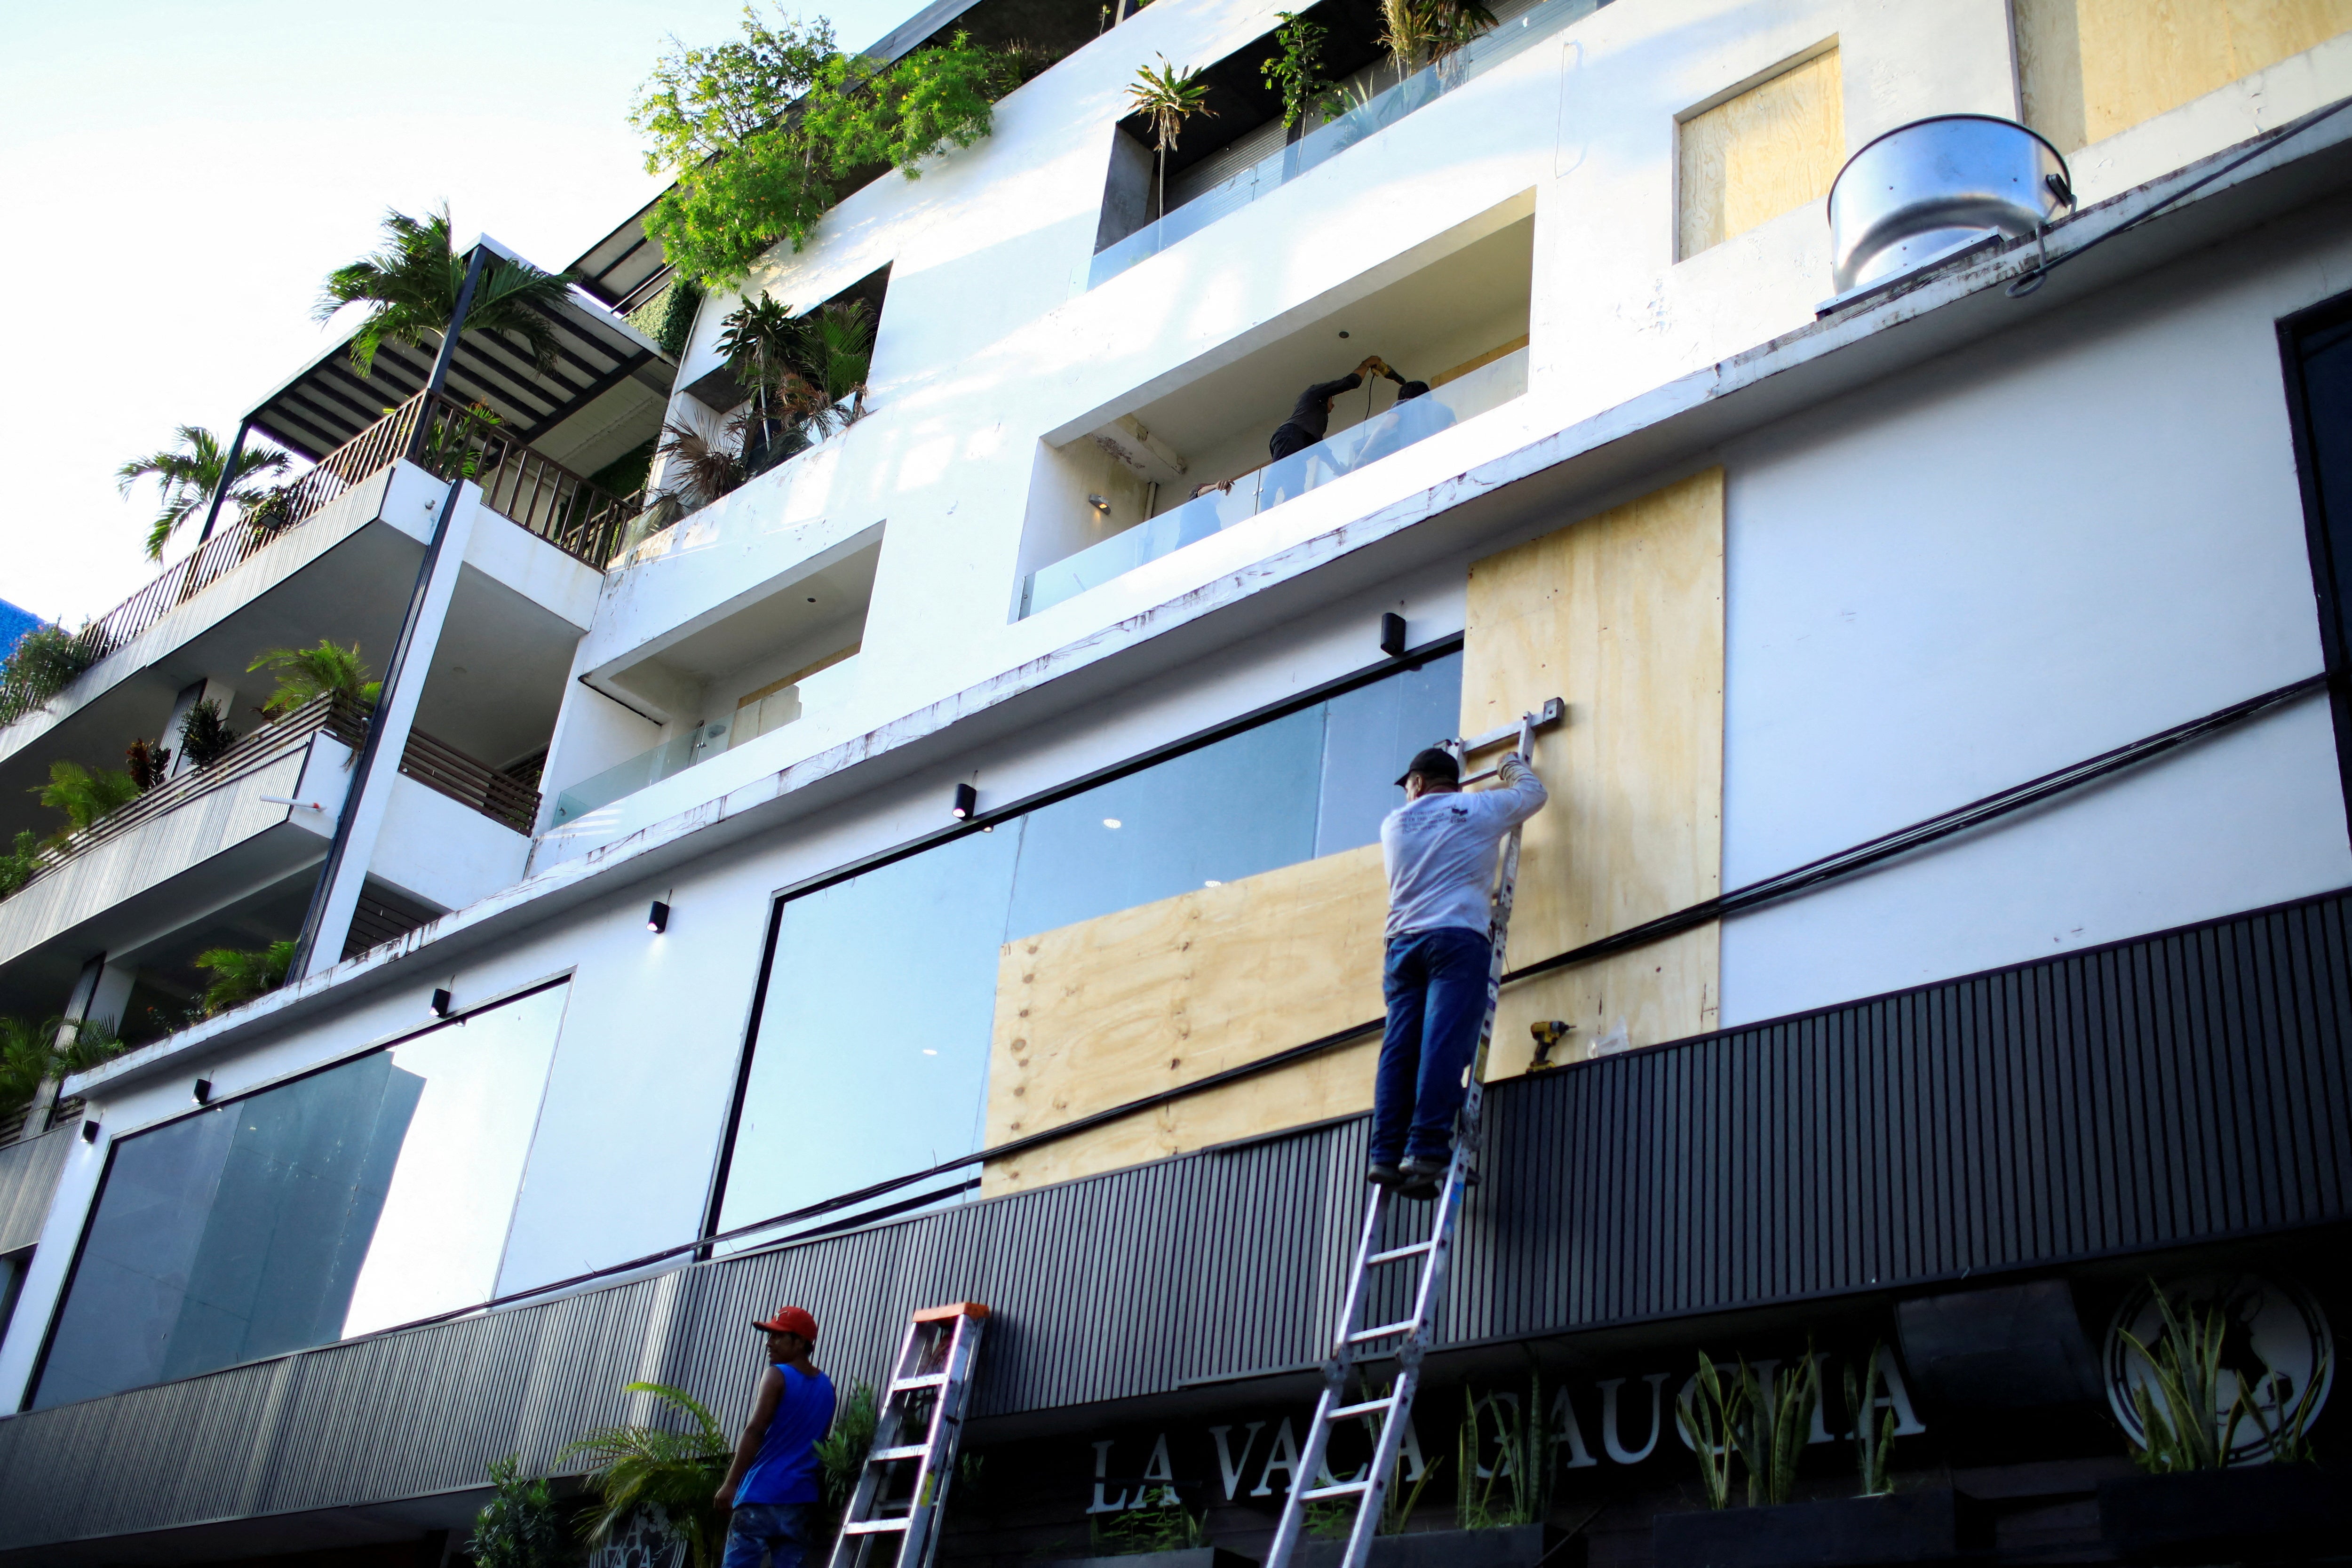 A worker installs wood boards on a building's windows ahead of Hurricane Beryl in Playa del Carmen, Mexico on July 3